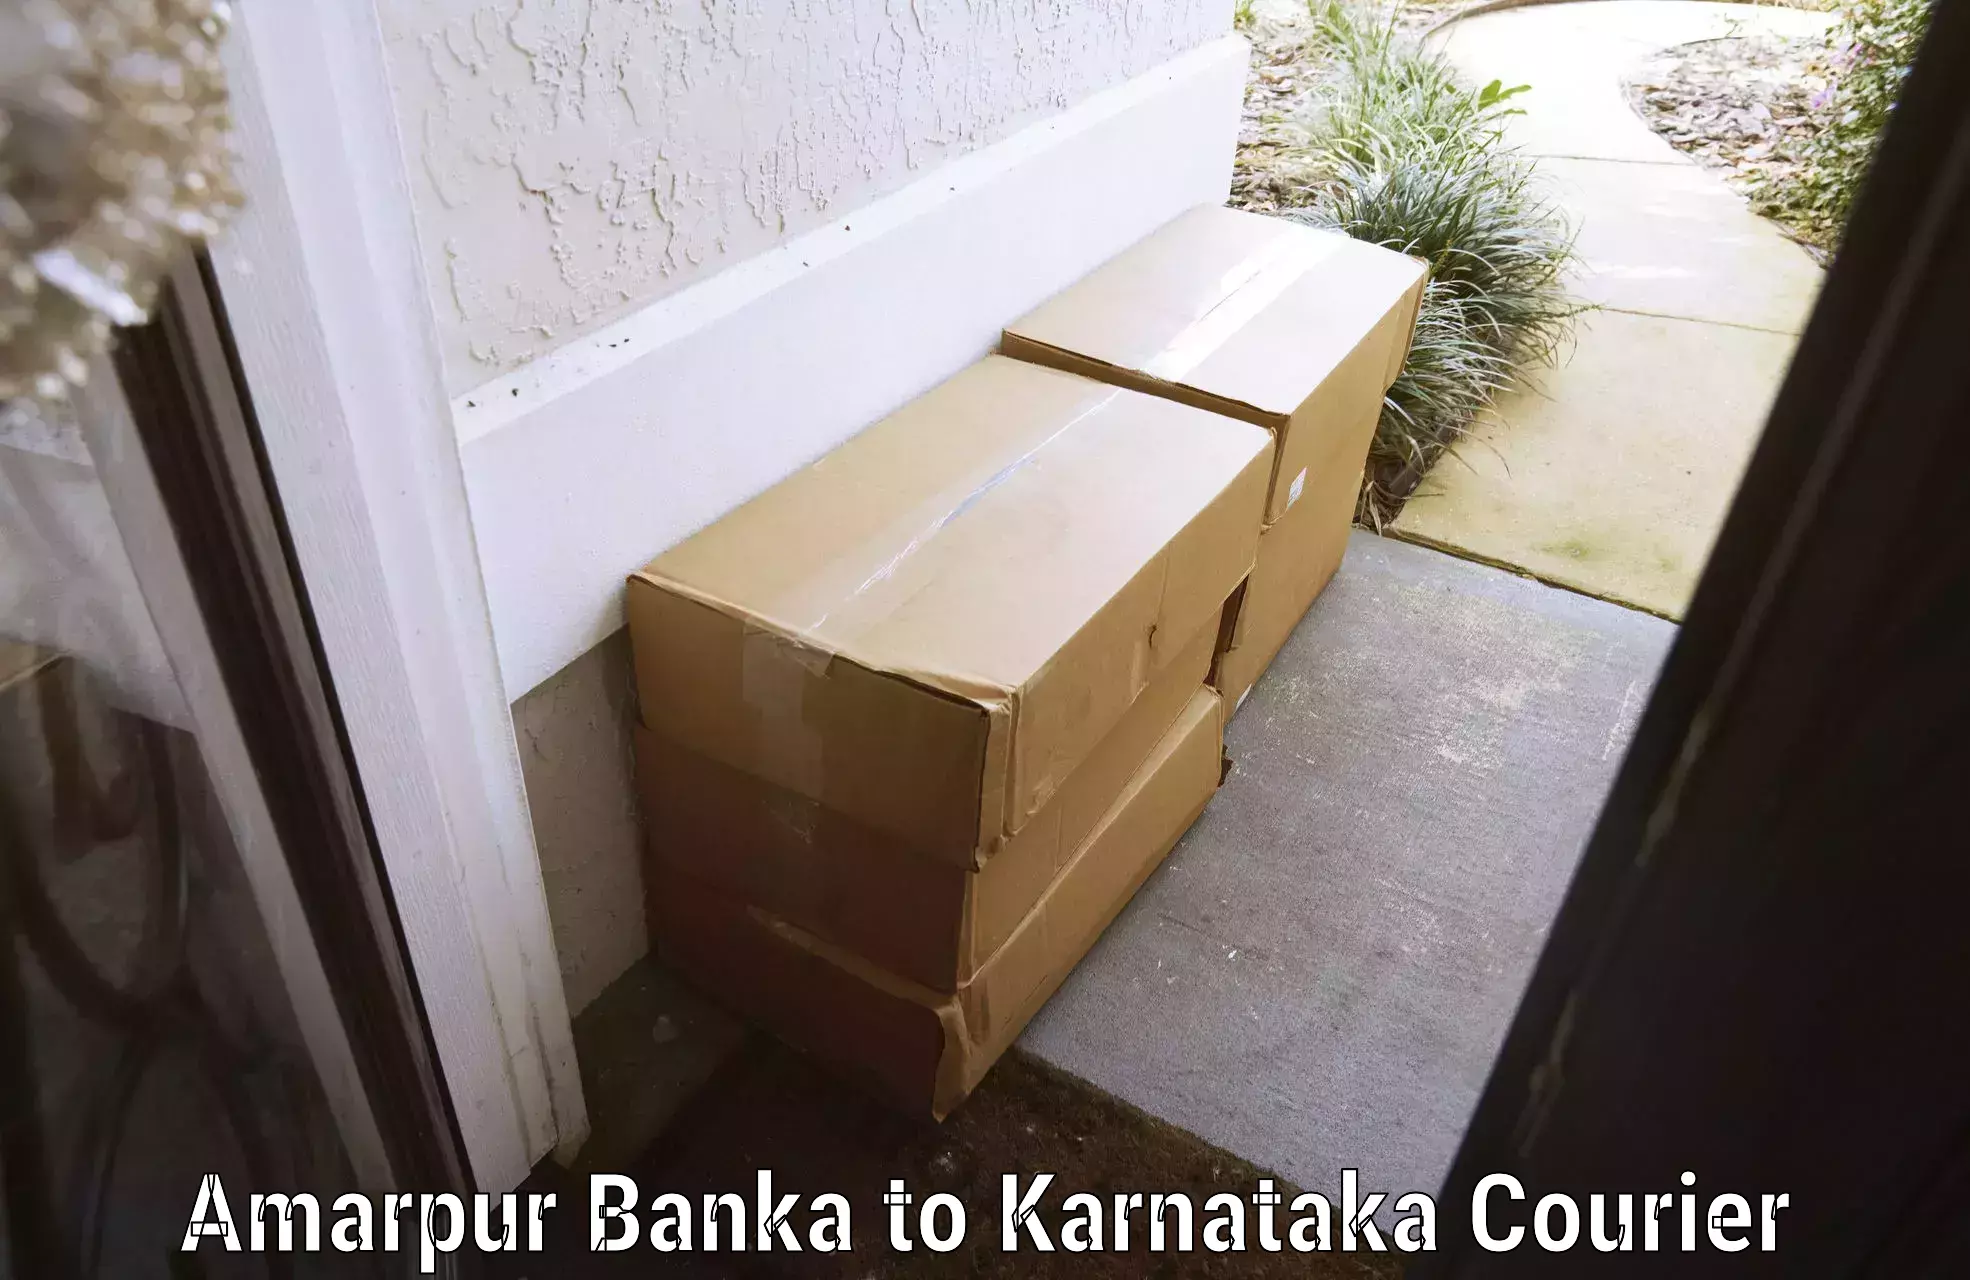 Baggage delivery support Amarpur Banka to Surathkal